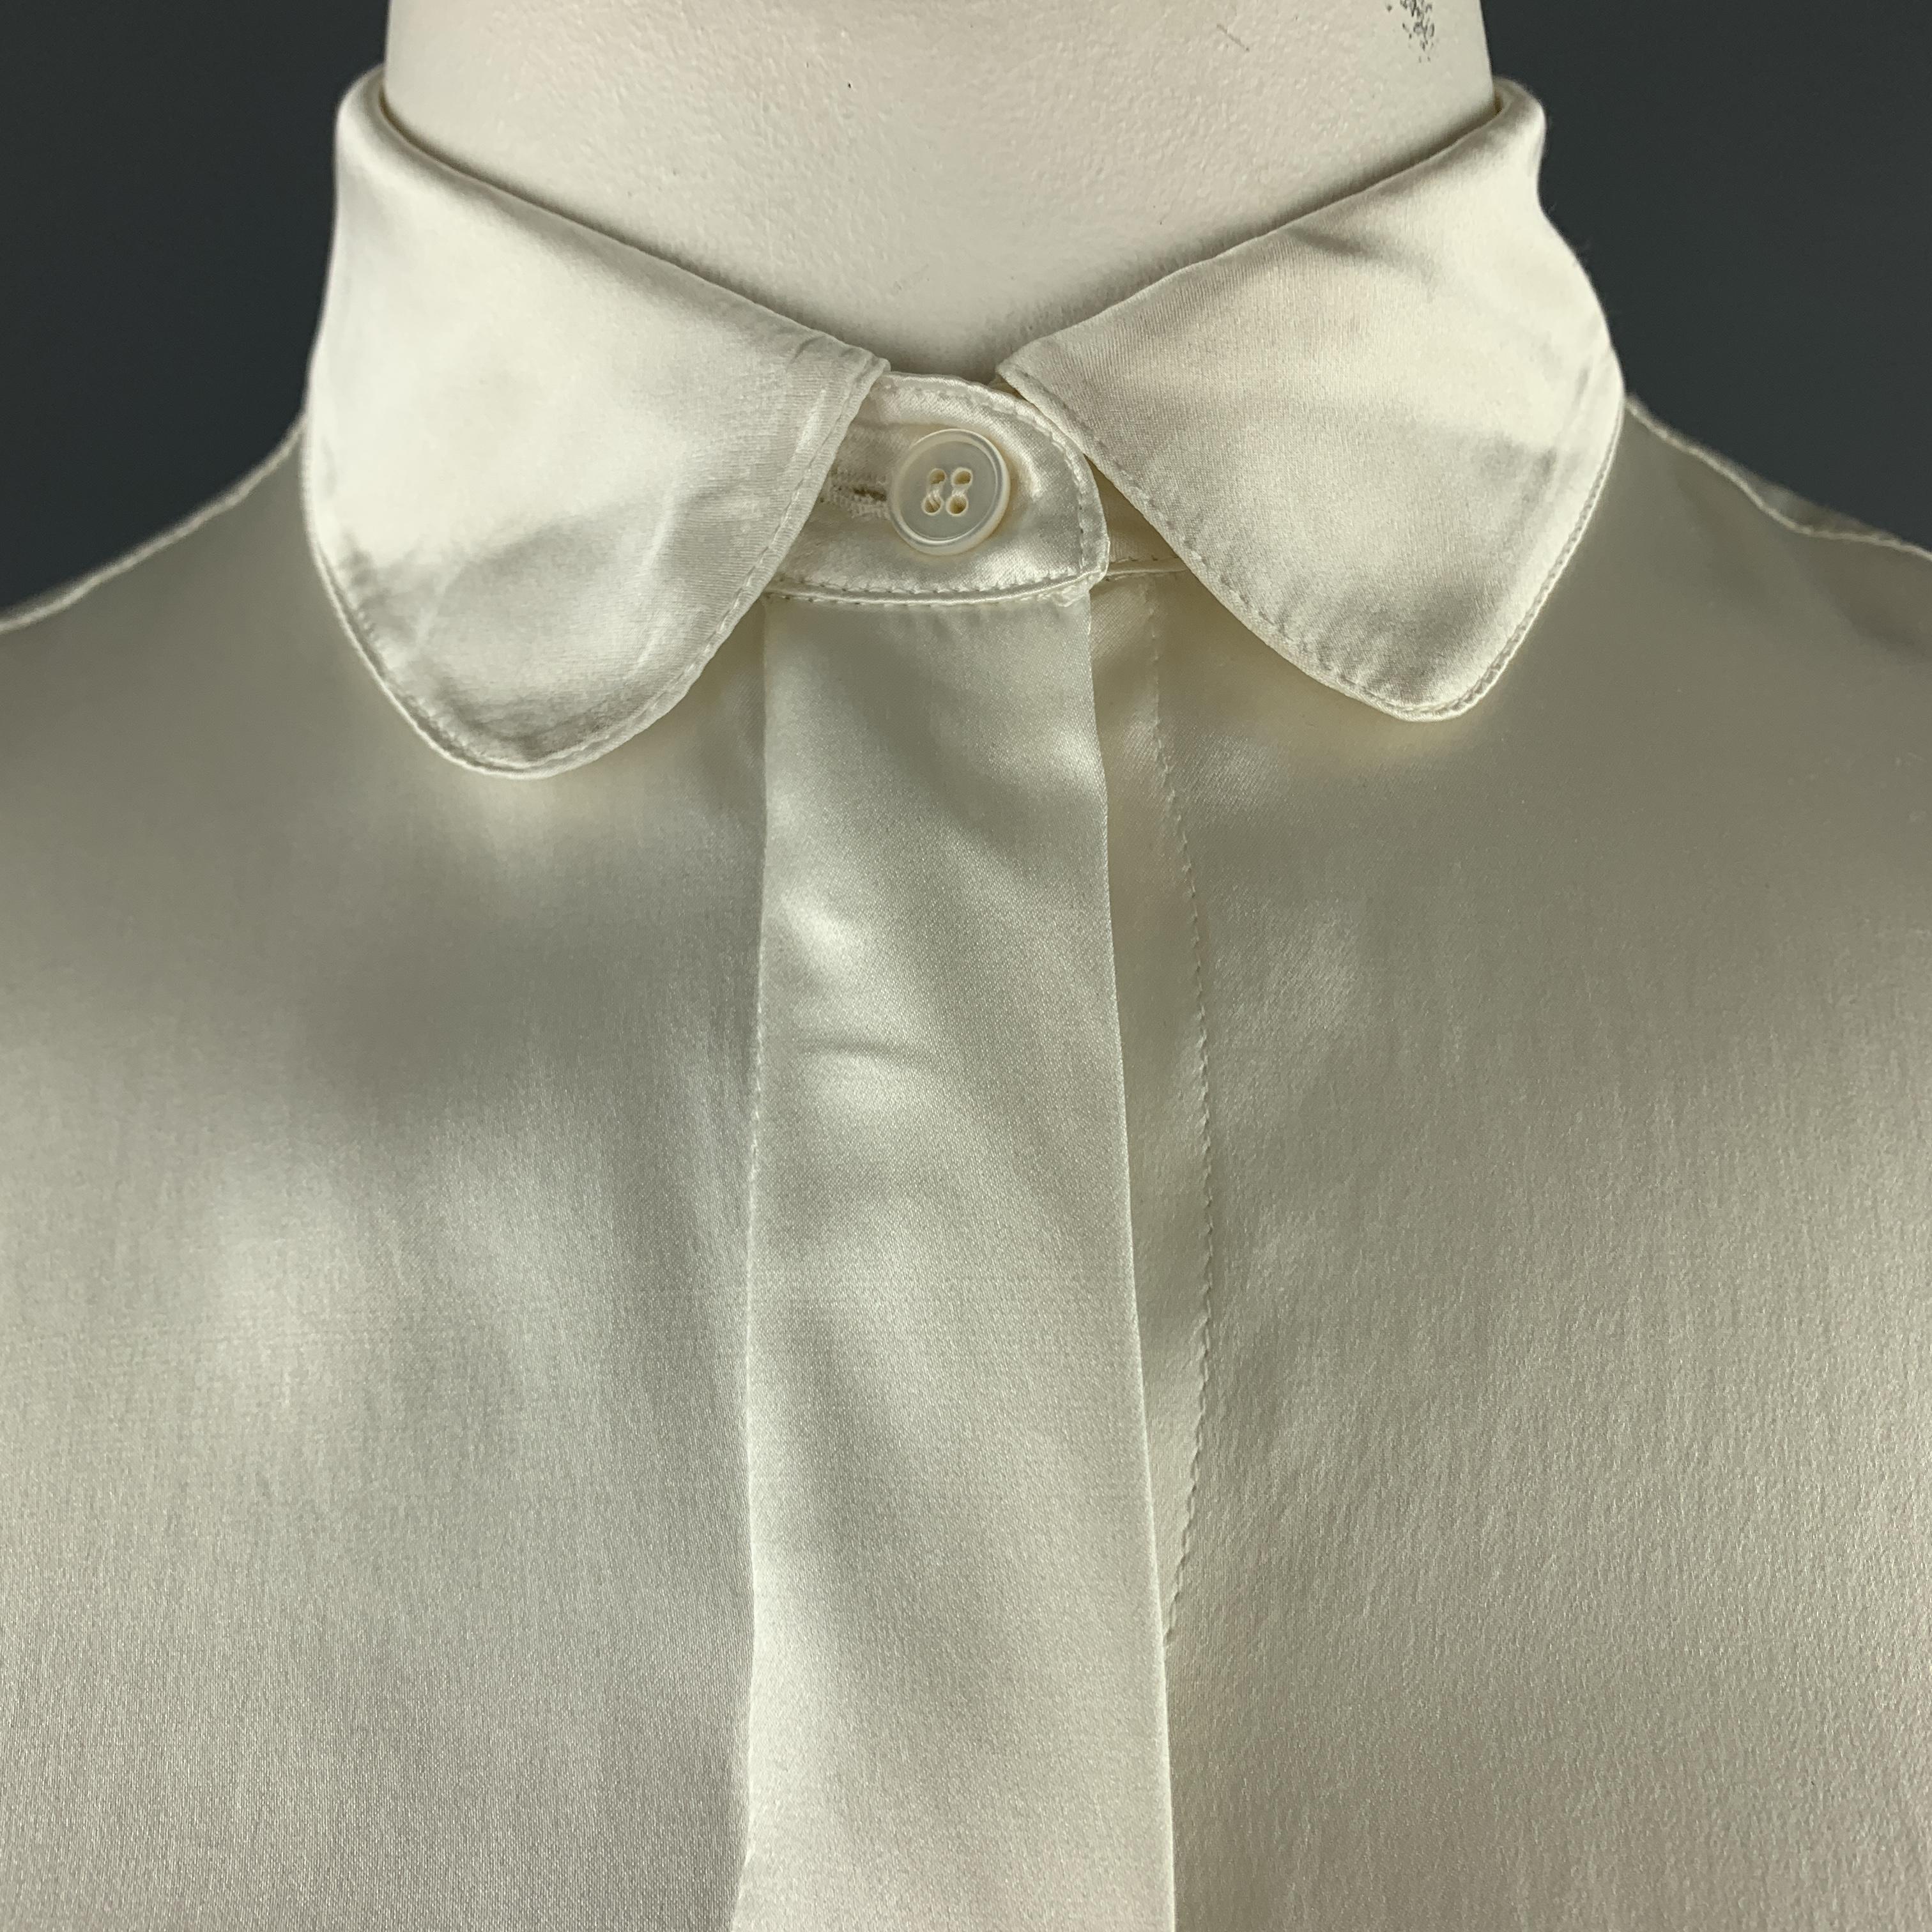 STELLA MCCARTNEY blouse comes in cream silk satin with a Peter Pan collar and hidden placket button front. 

Good Pre-Owned Condition.
Marked: IT 48
Original Retail Price: $600.00

Measurements:

Shoulder: 14 in.
Bust: 42 in.
Sleeve: 24 in.
Length: